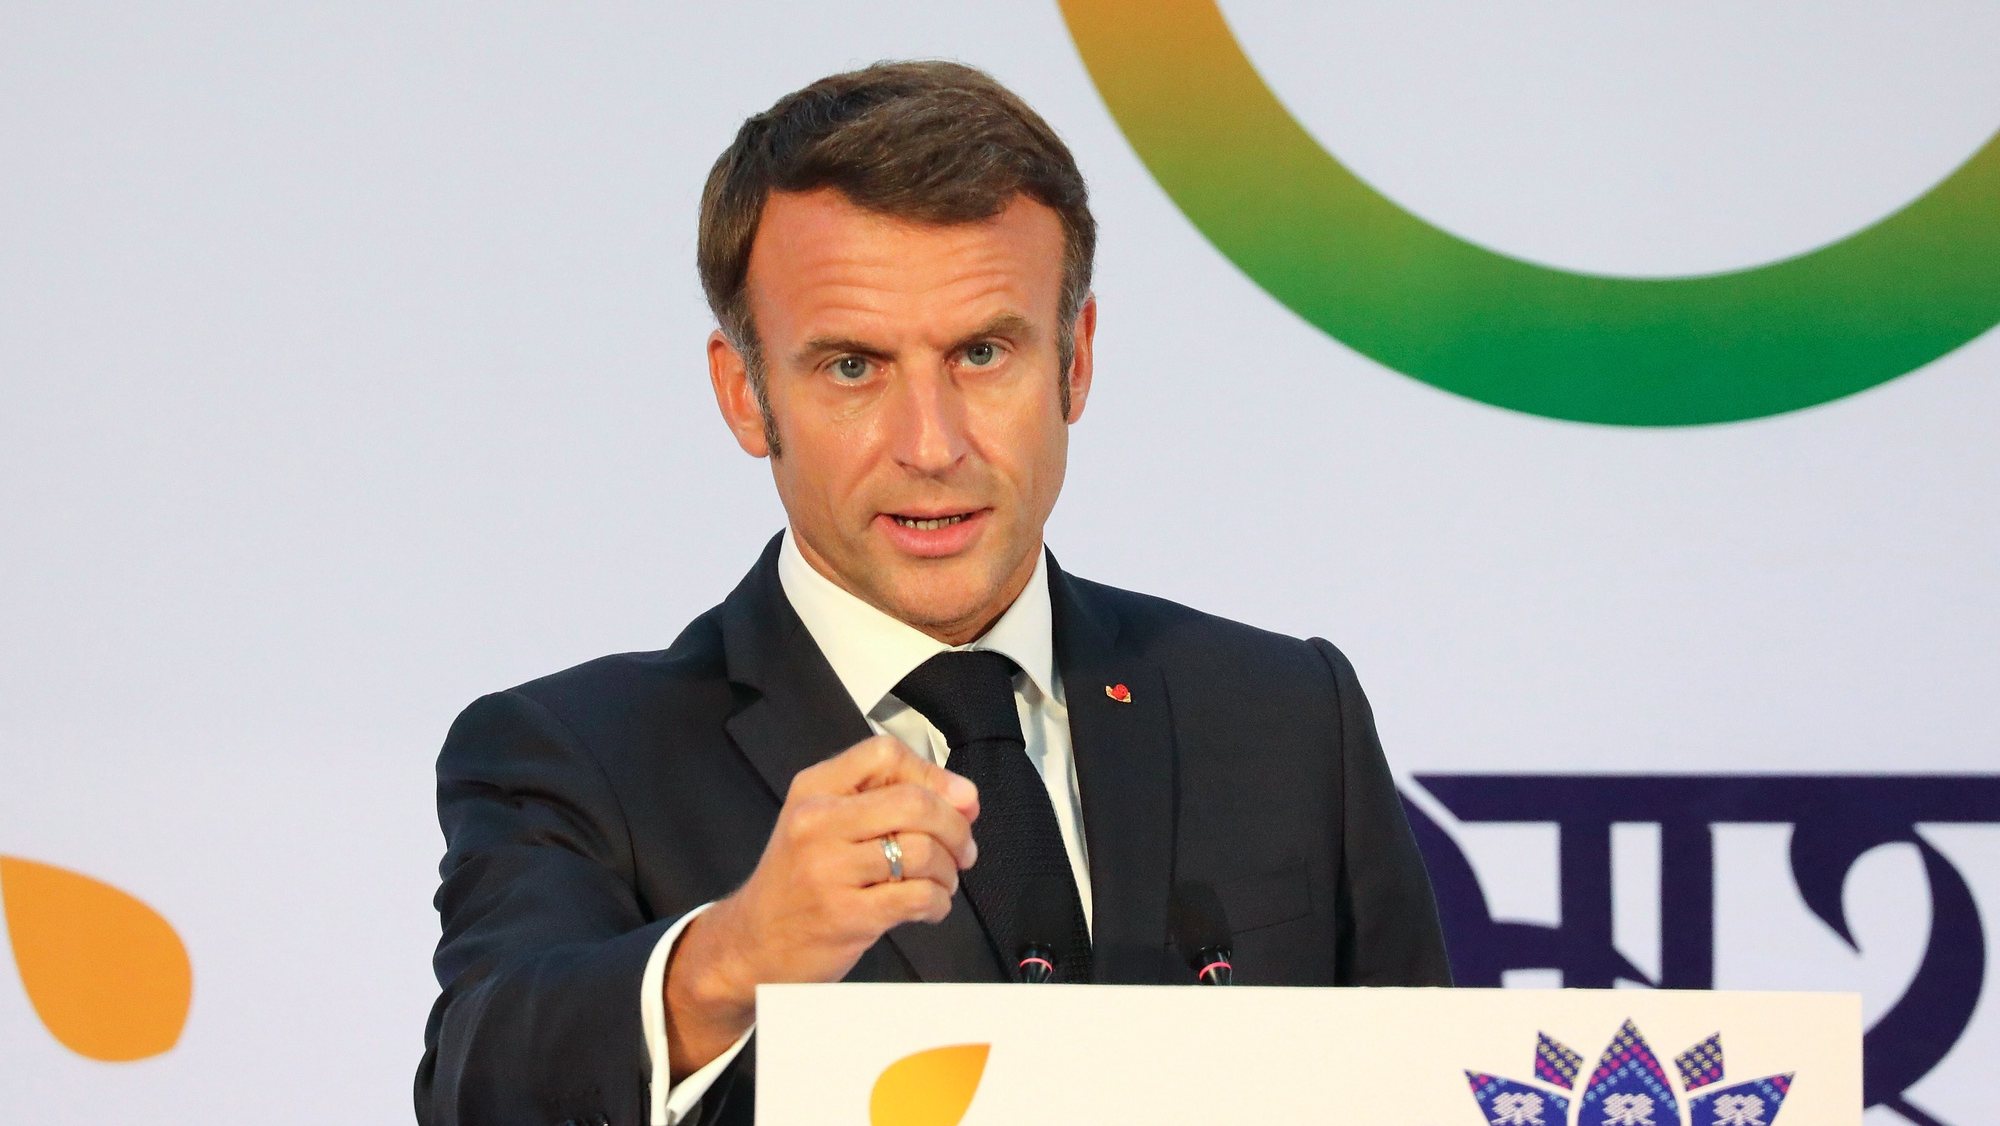 epa10852378 French President Emmanuel Macron addresses a press conference at the international media center during the G20 Summit in New Delhi, India, 10 September 2023. The G20 Heads of State and Government summit took place in the Indian capital on 09 and 10 September.  EPA/HARISH TYAGI